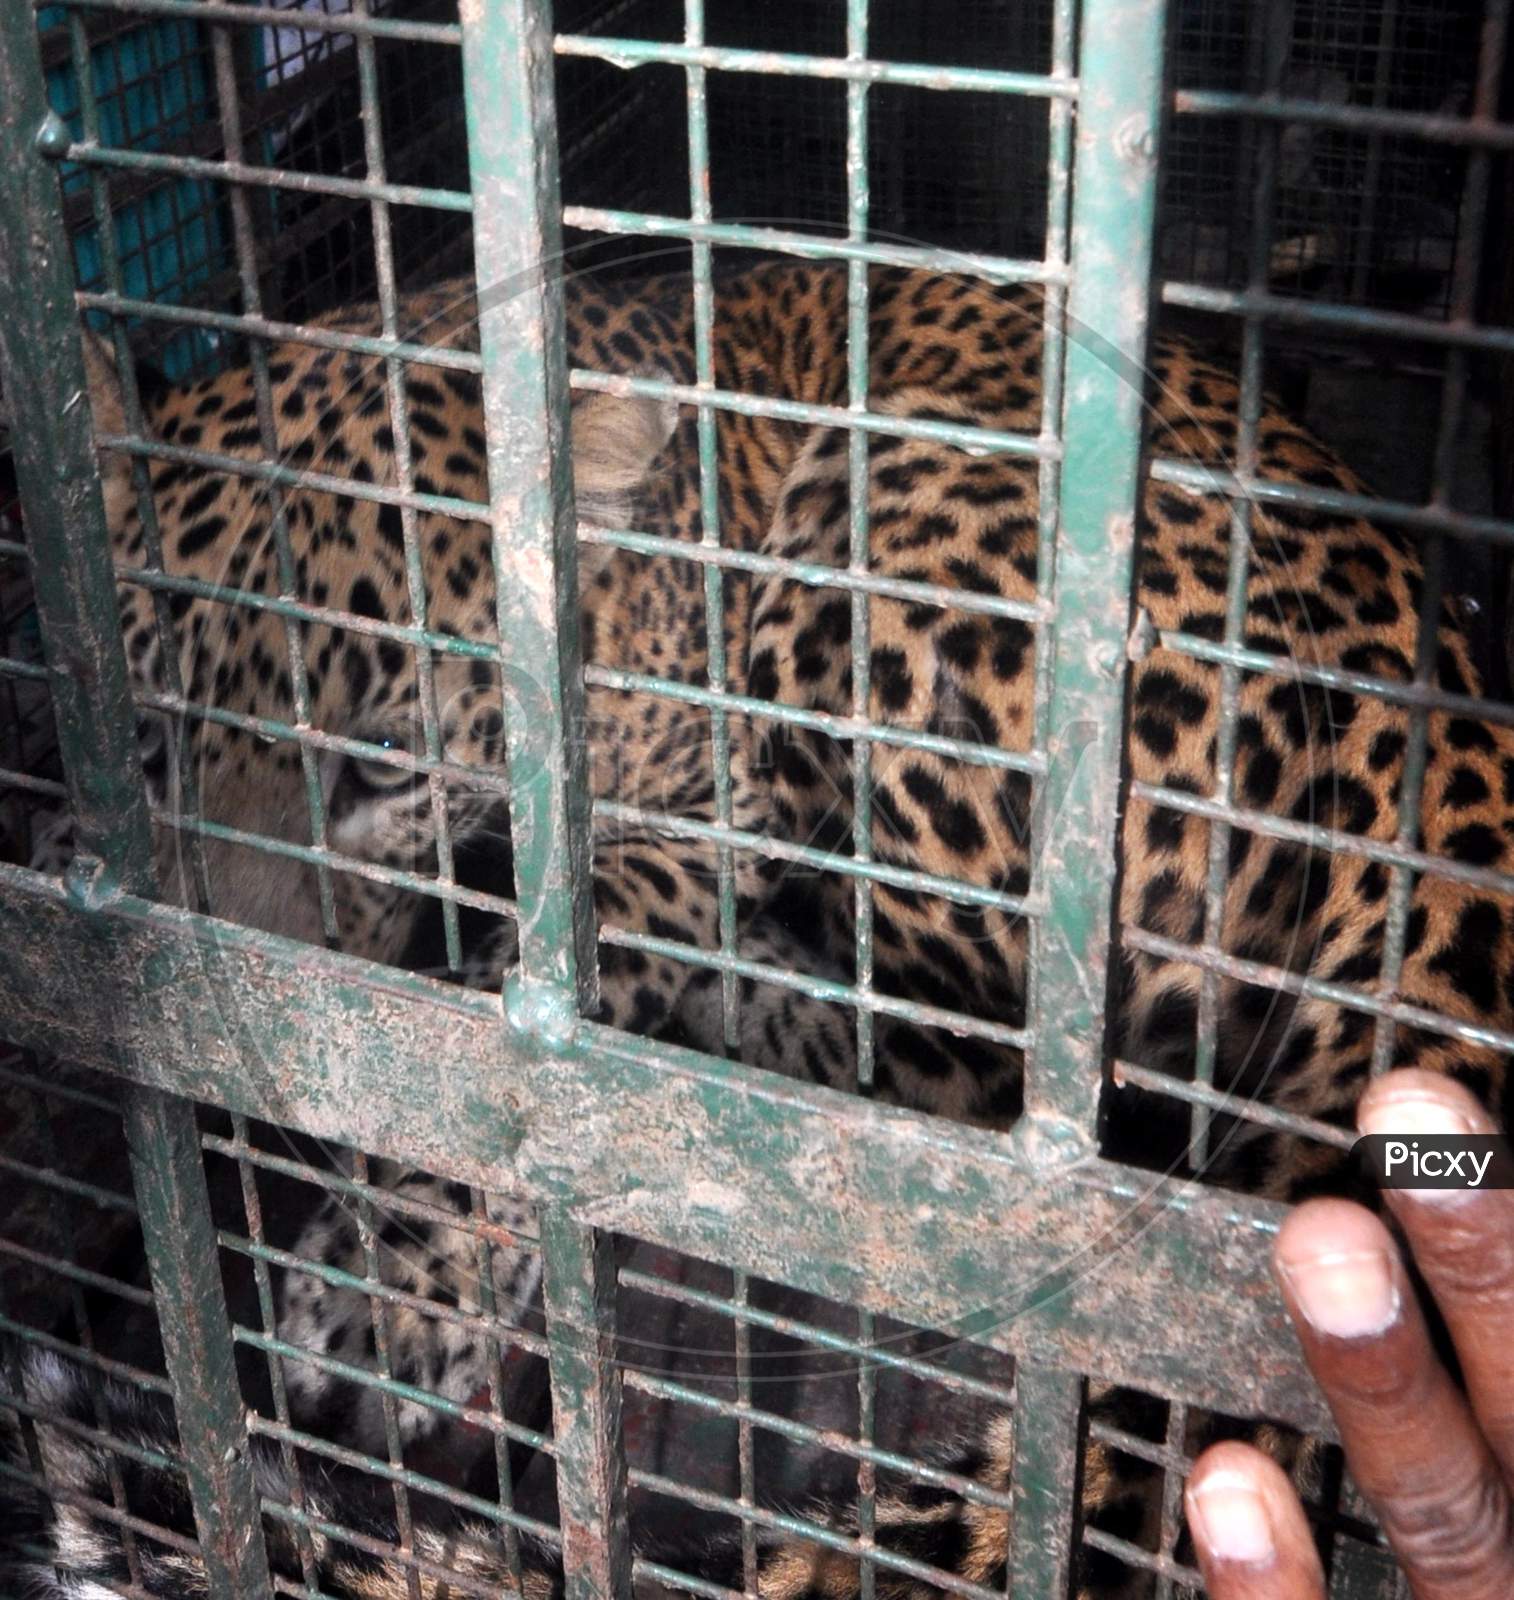 A leopard in a cage after it was rescued by the forest department at an a Girl’s hostel in a residential area in Guwahati on noov 30,2020